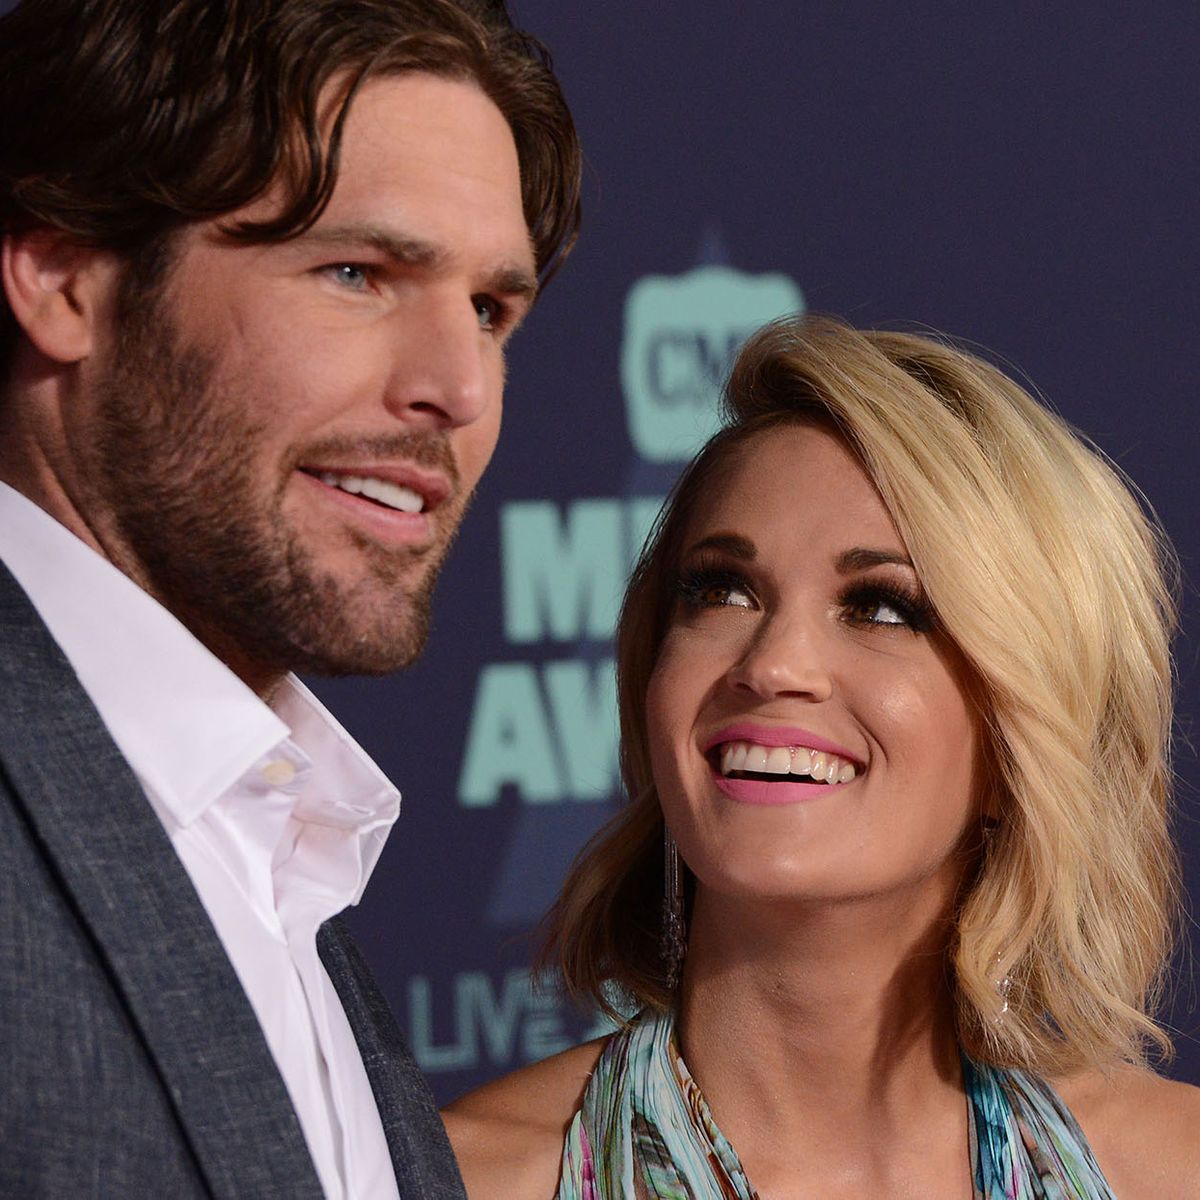 Carrie Underwood's Friends Want Her To Focus On Her Marriage